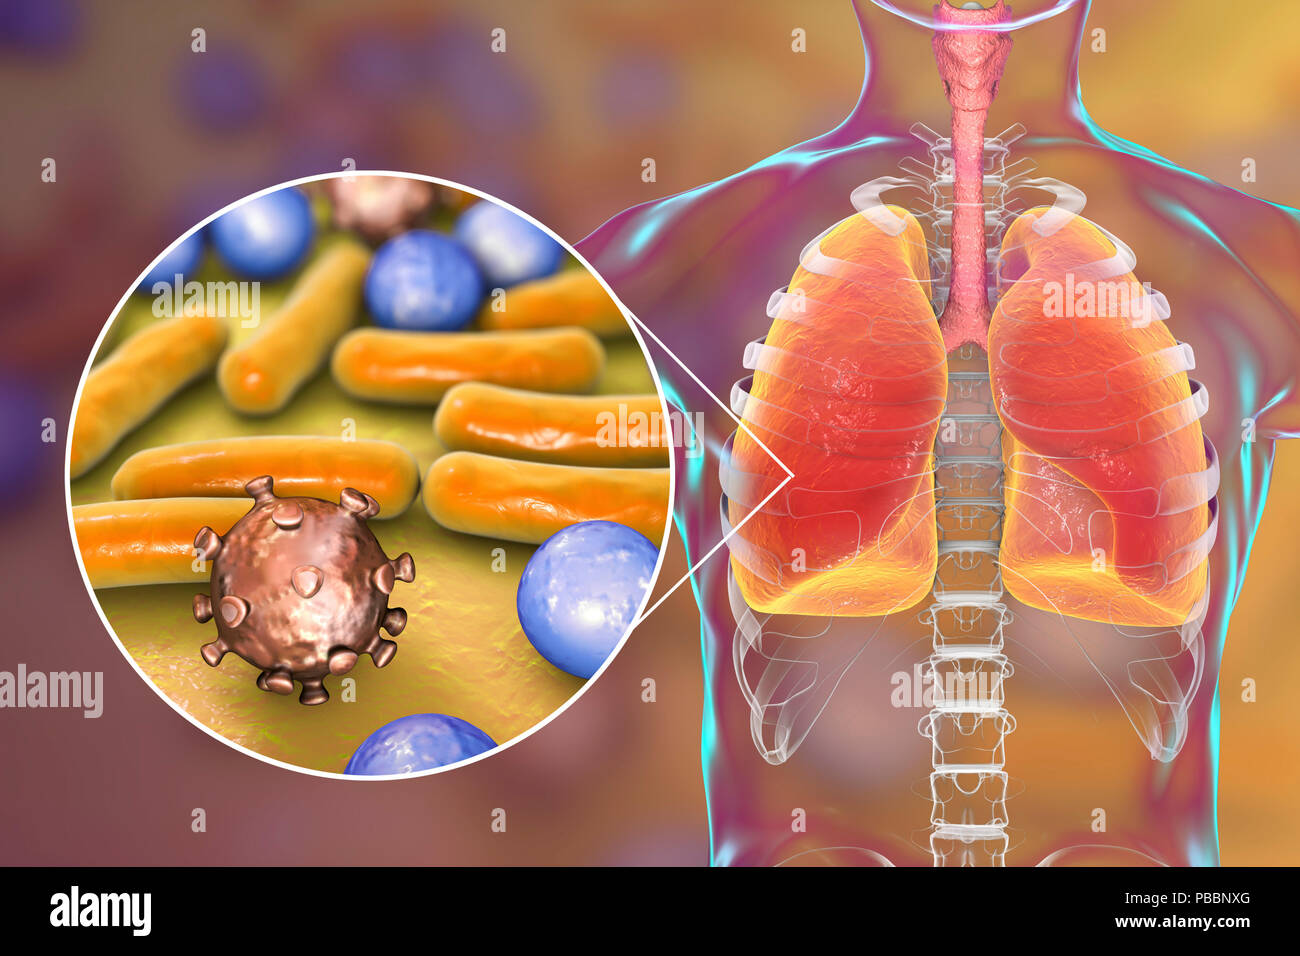 Pneumonia of mixed etiology, conceptual illustration. Human lungs and close-up view of bacteria and viruses, two of the causative agents of pneumonia. Stock Photo